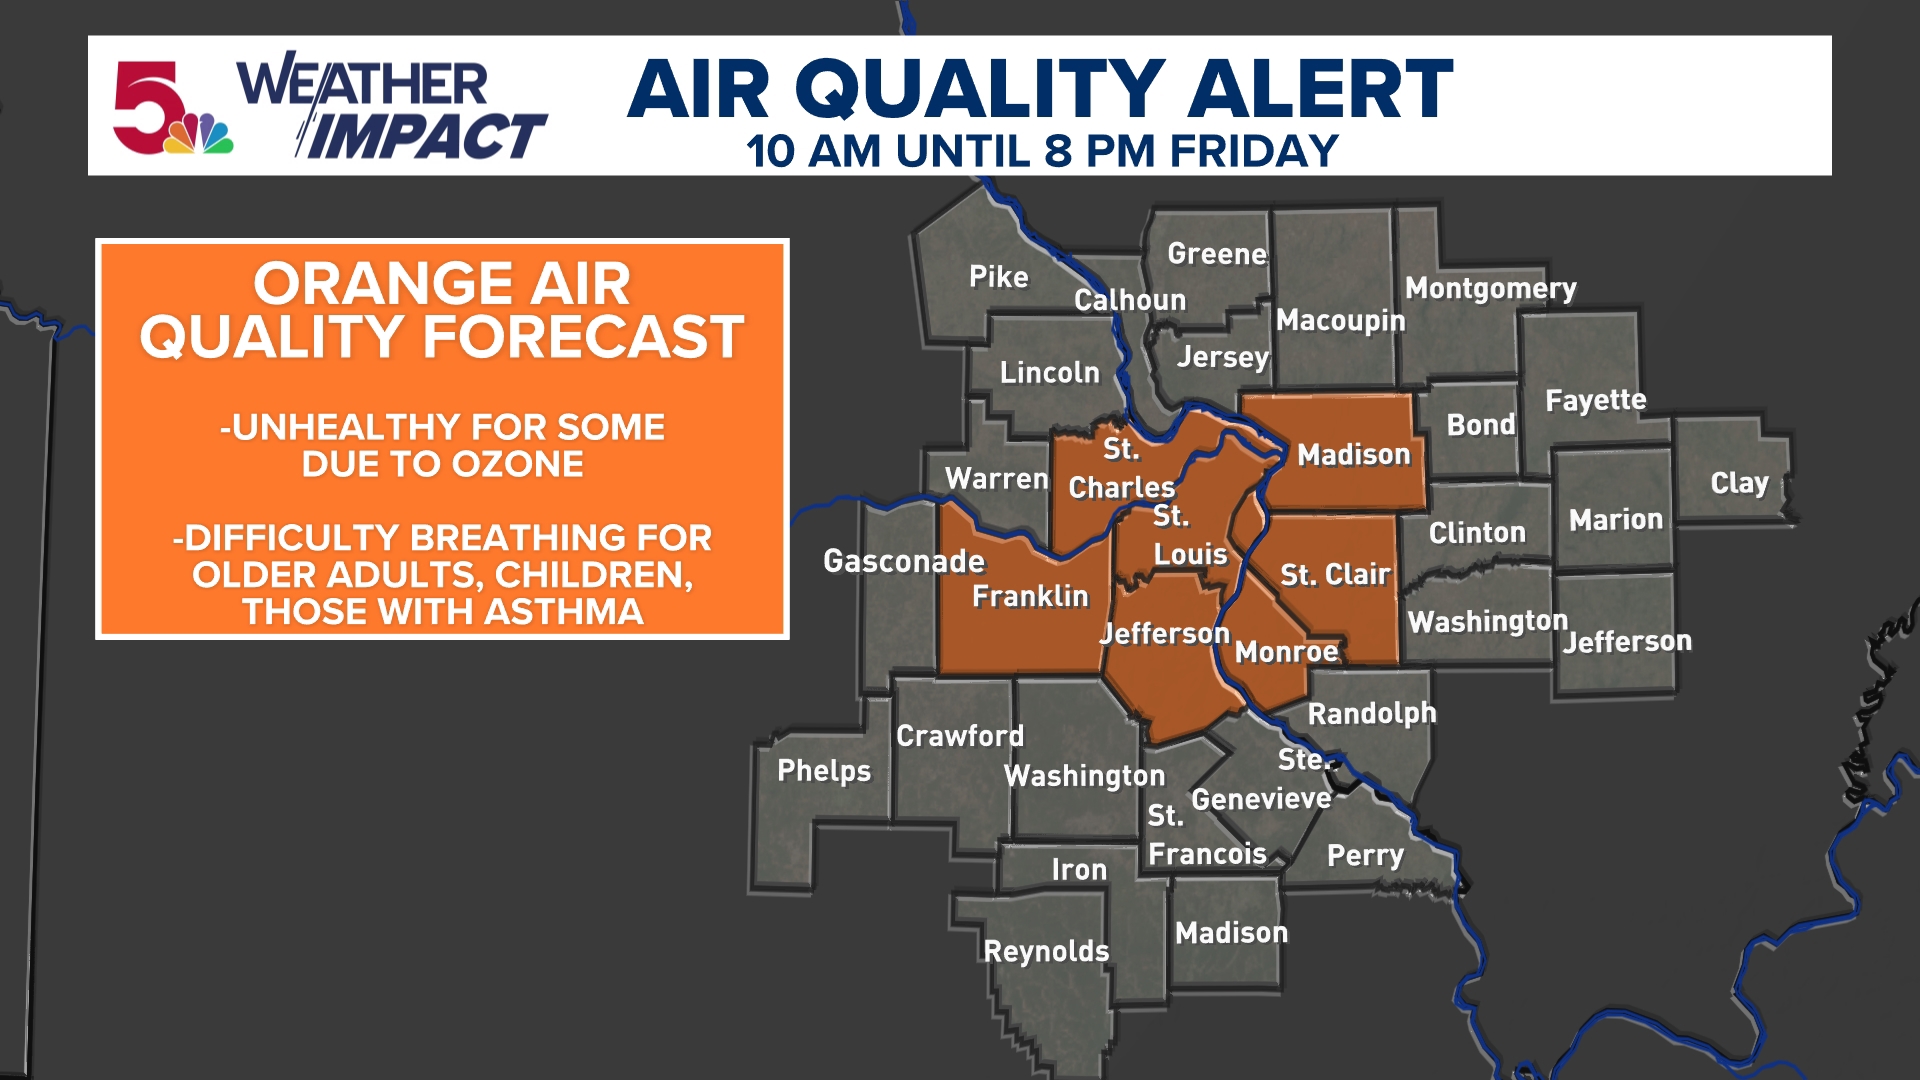 Ozone levels are expected to rise into the unhealthy for sensitive groups category, or orange, Friday. Light winds and adequate sunshine lead to the ozone formation.